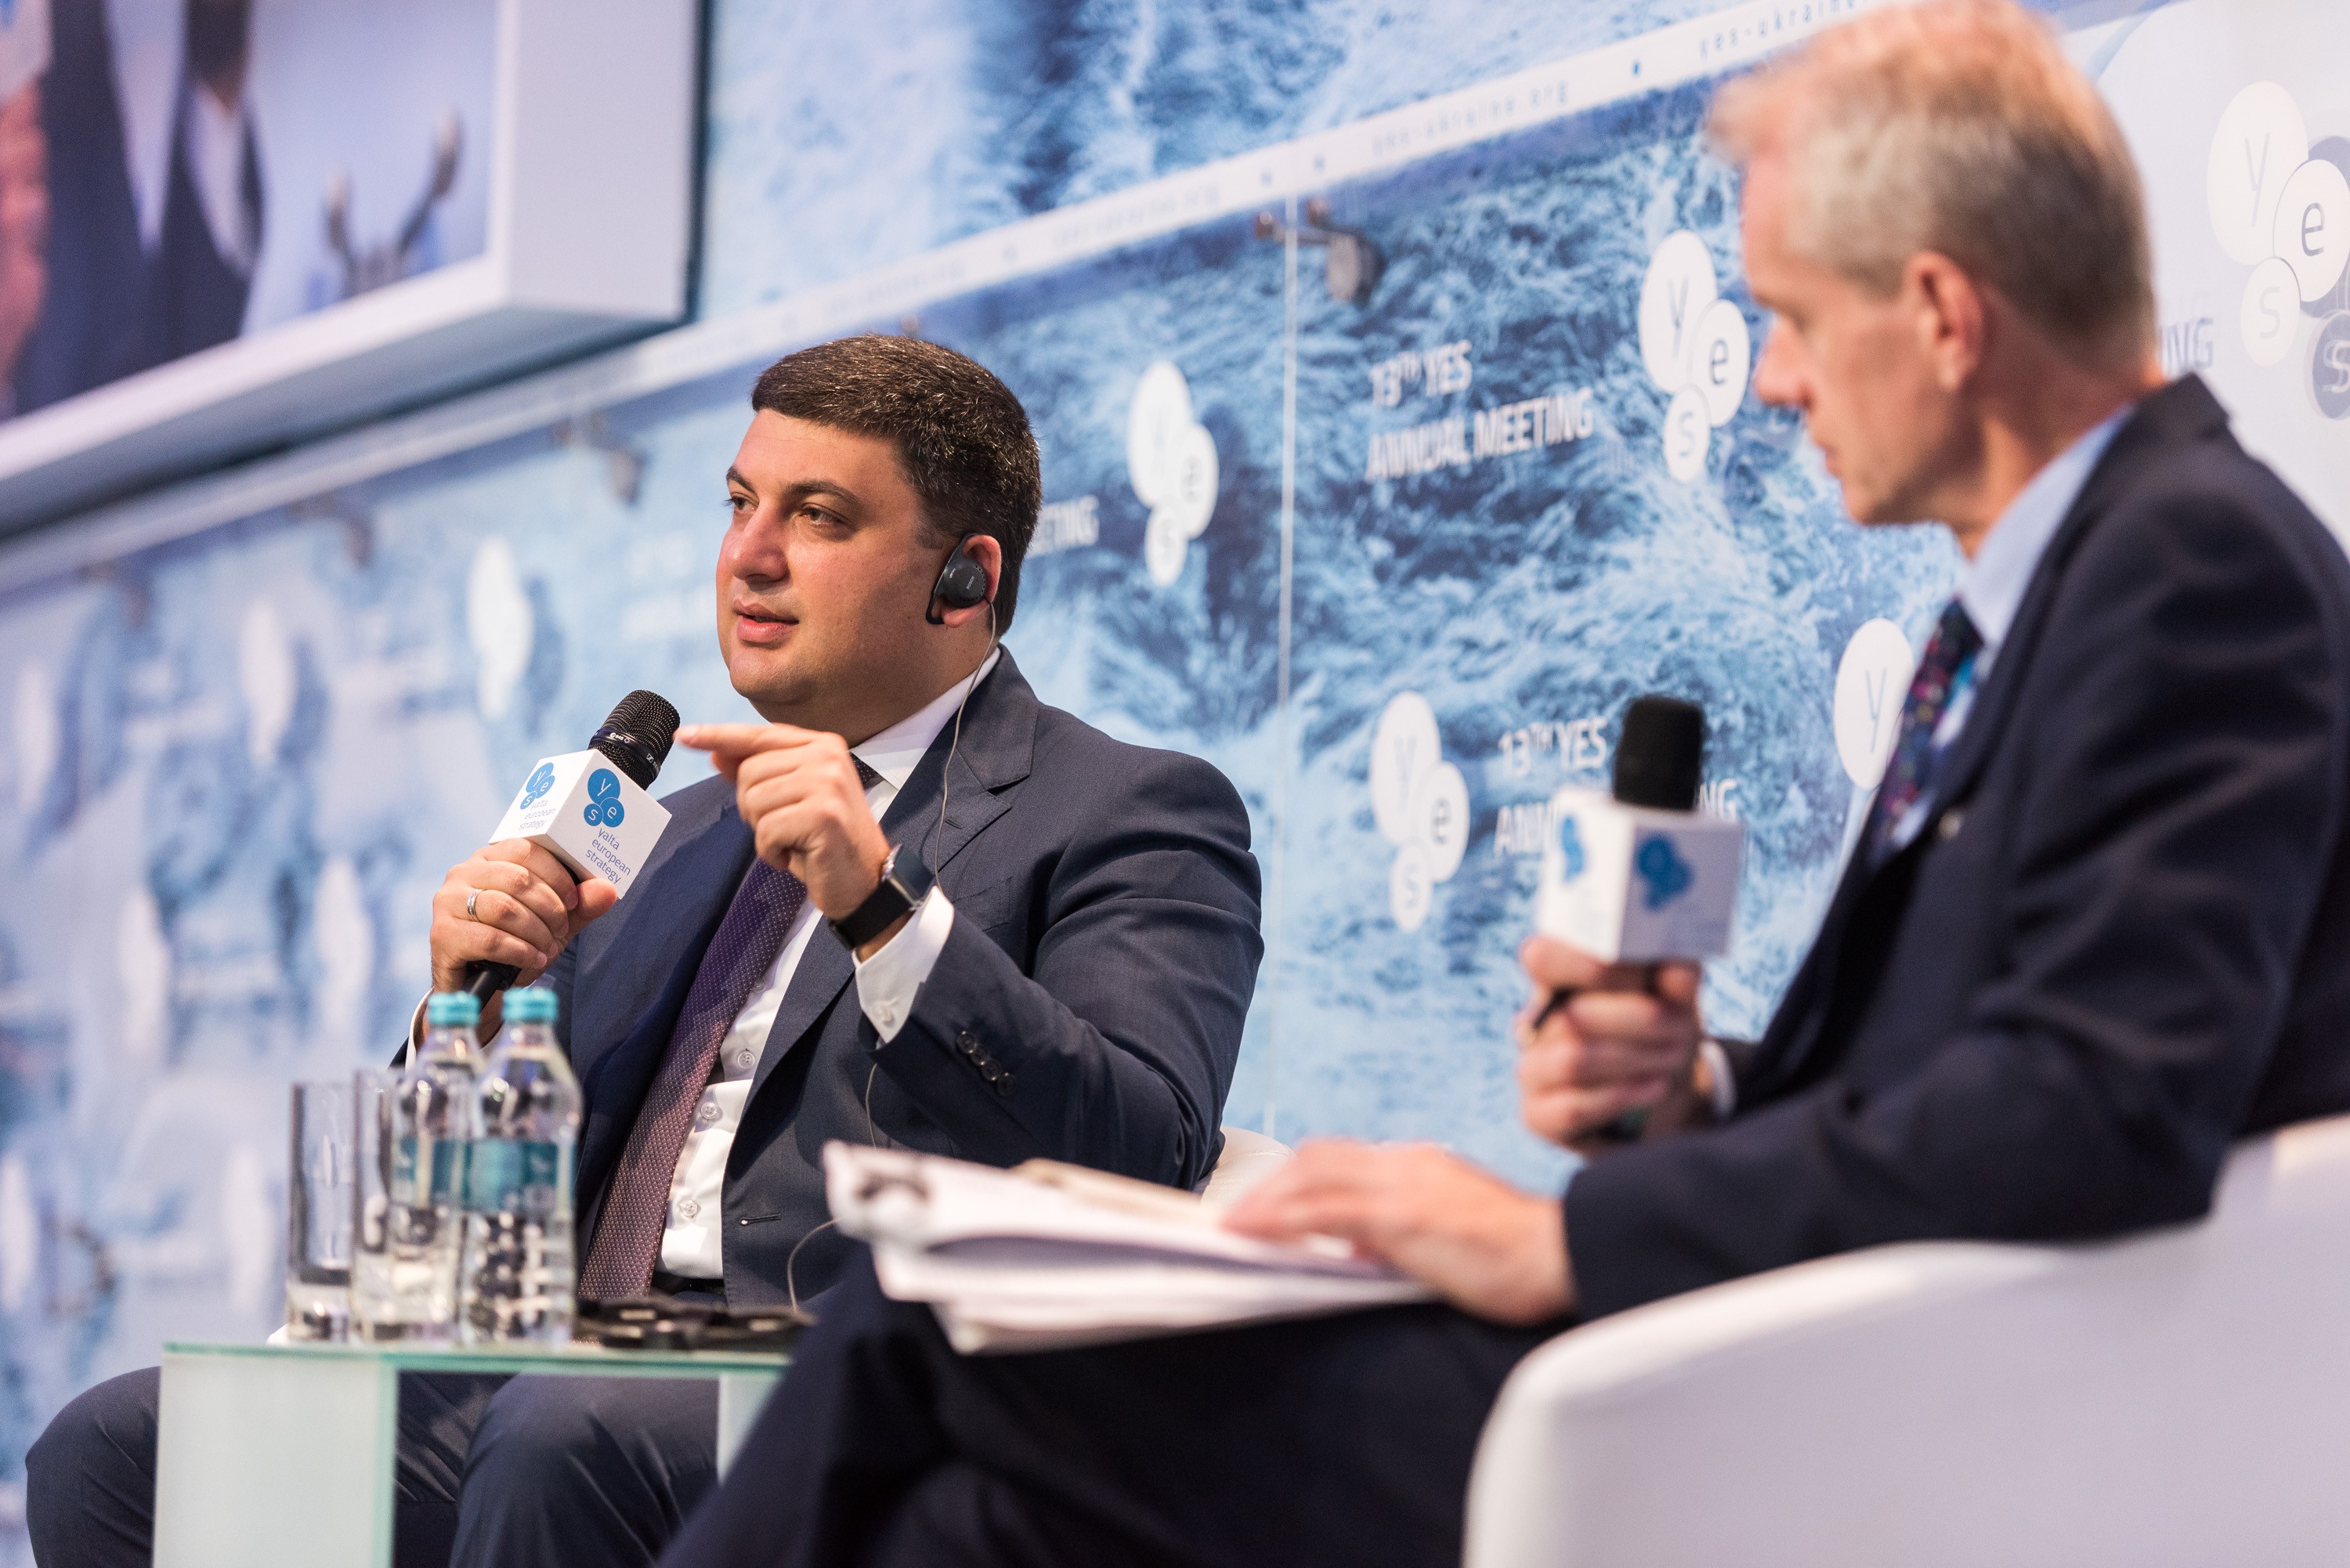 Prime Minister Volodymyr Groysman answers questions from moderator Stephen Sacker of the BBC at a Yalta European Strategy conference in Kyiv on Sept. 17.